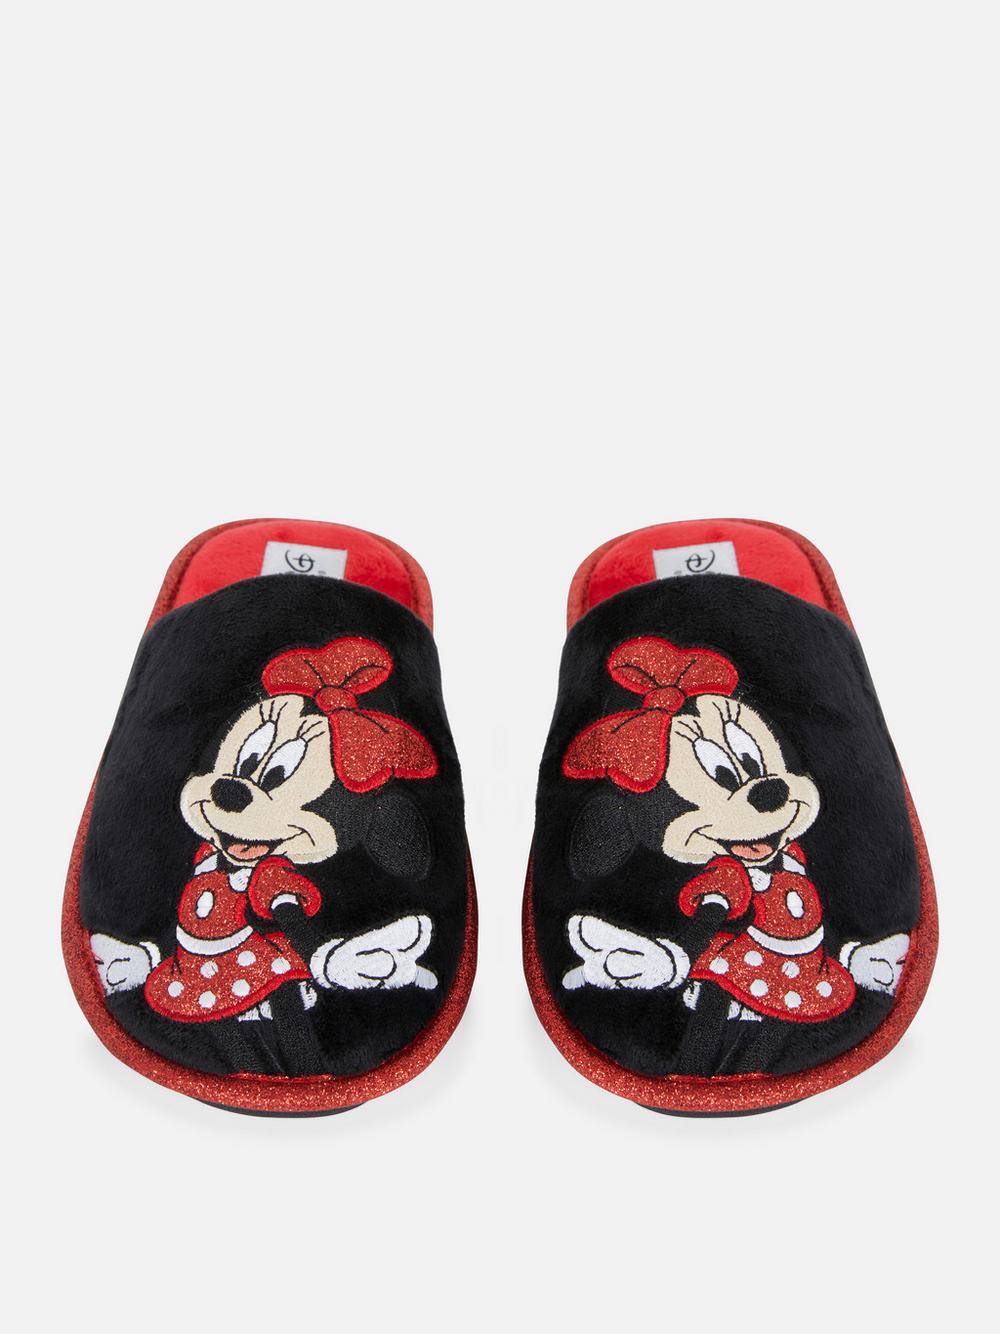 Psychiatrie Reis Mount Bank Disney's Minnie Mouse Slippers(Pre Oder 11-12 days) | LINE SHOPPING